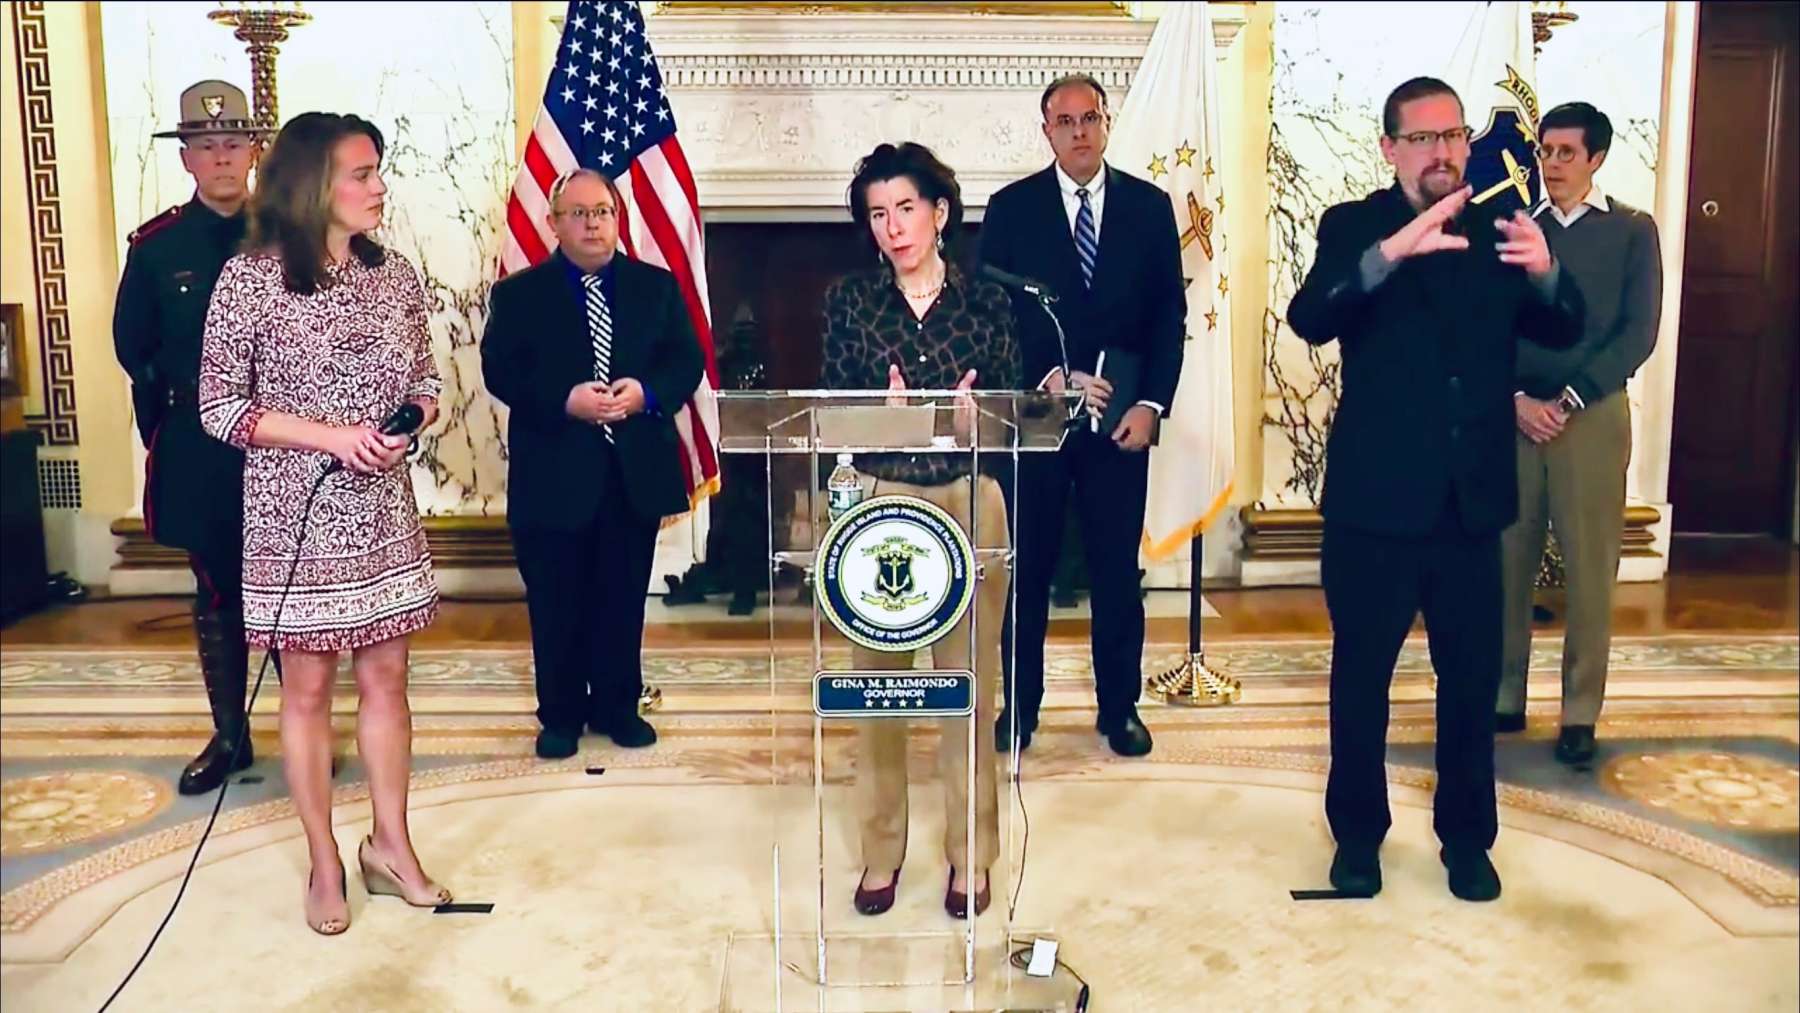 Rhode Island News: Governor Raimondo takes the high road in disagreement with Cuomo